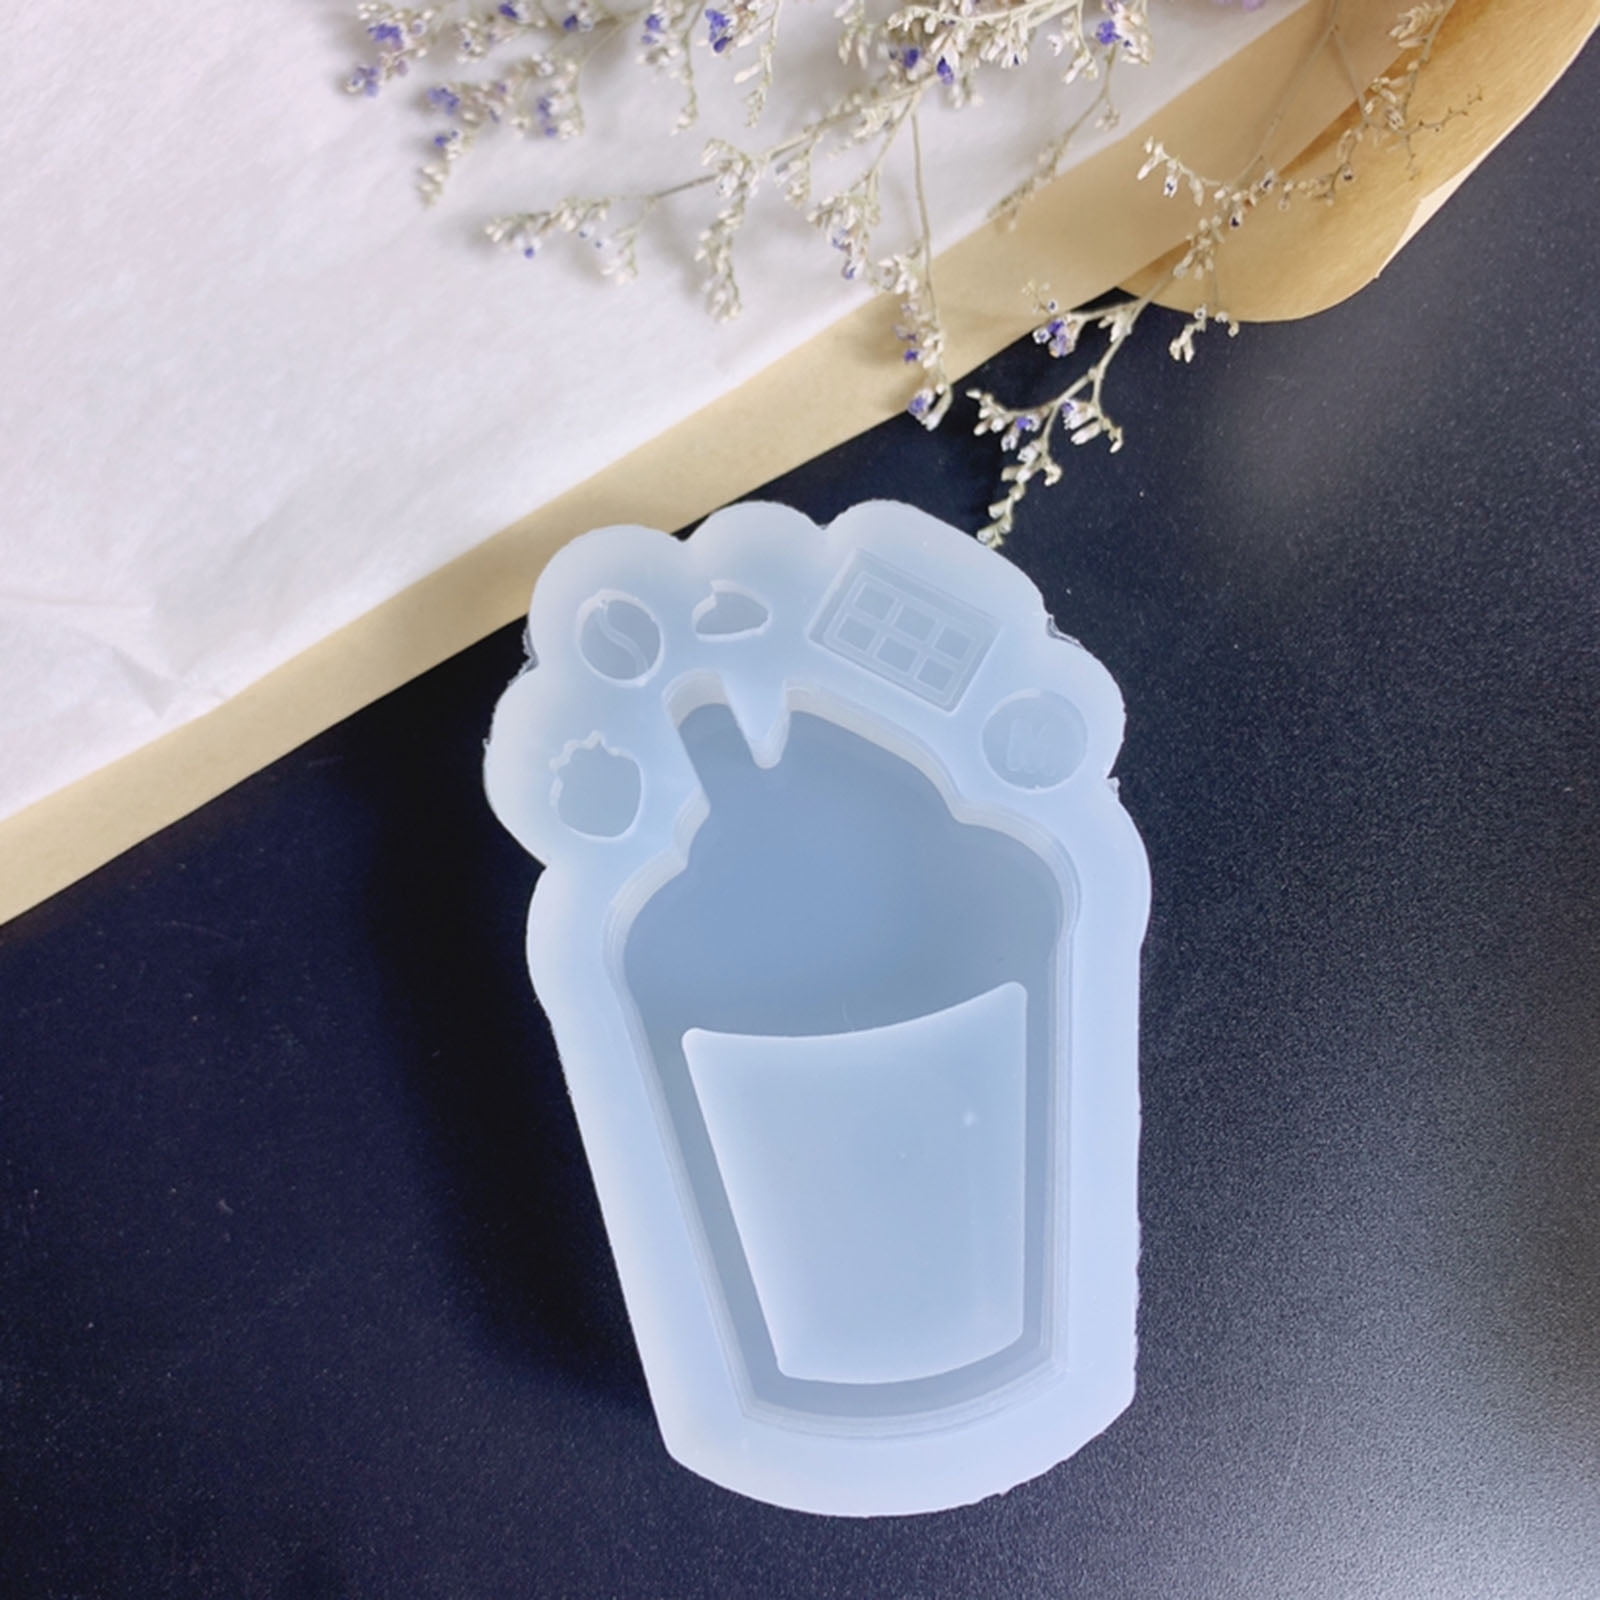 JNANEEI Resin Casting Shaker Mold,Epoxy Quicksand Silicone Molds